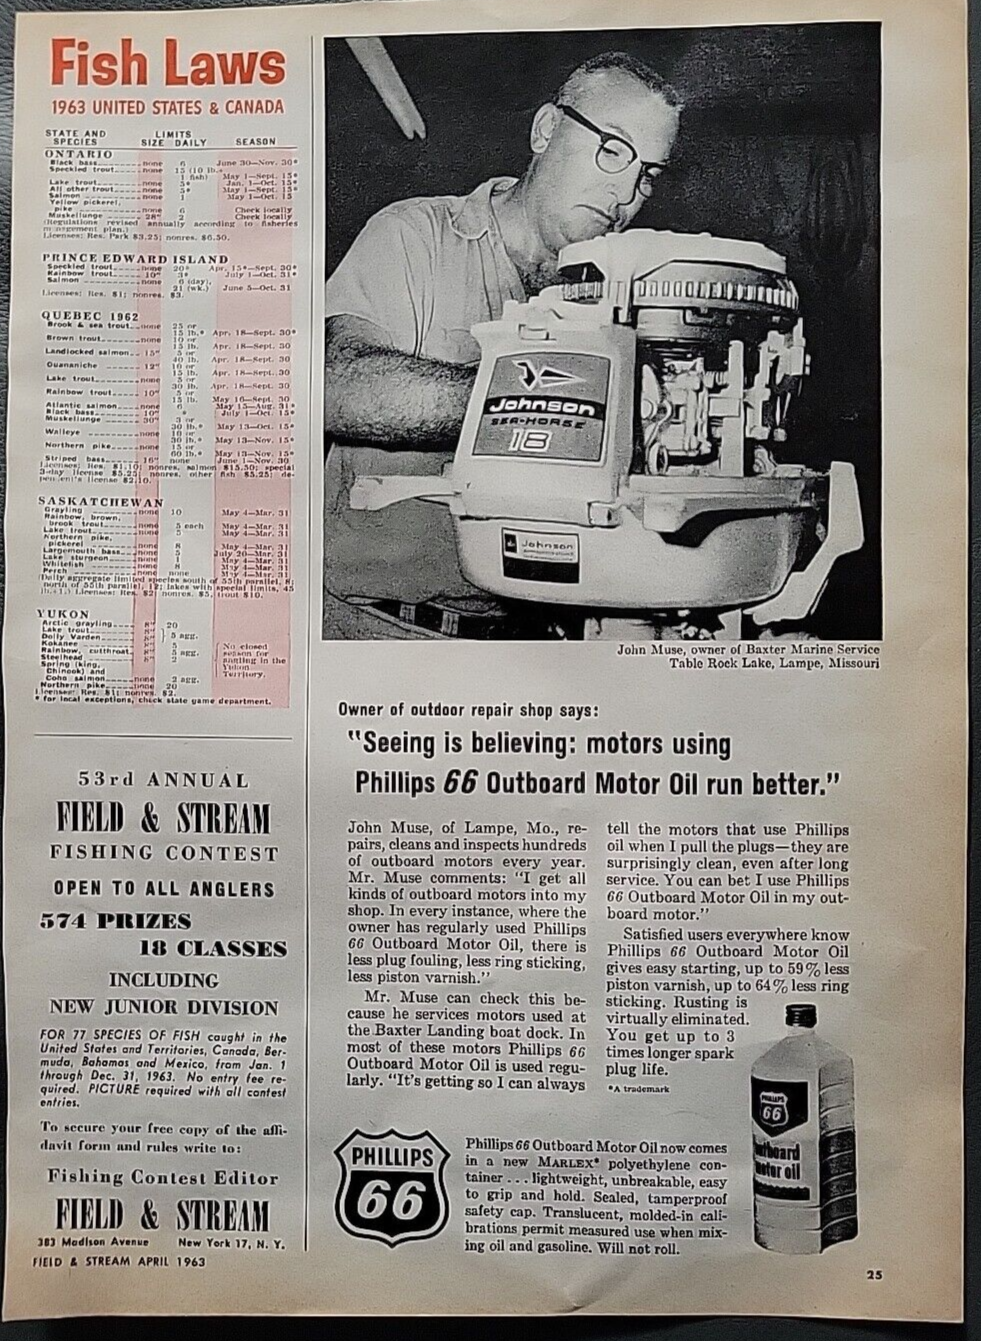 Vintage 1963 Phillips 66 Outboard Motor Oil "Marlex" Container Print Ad - $8.59